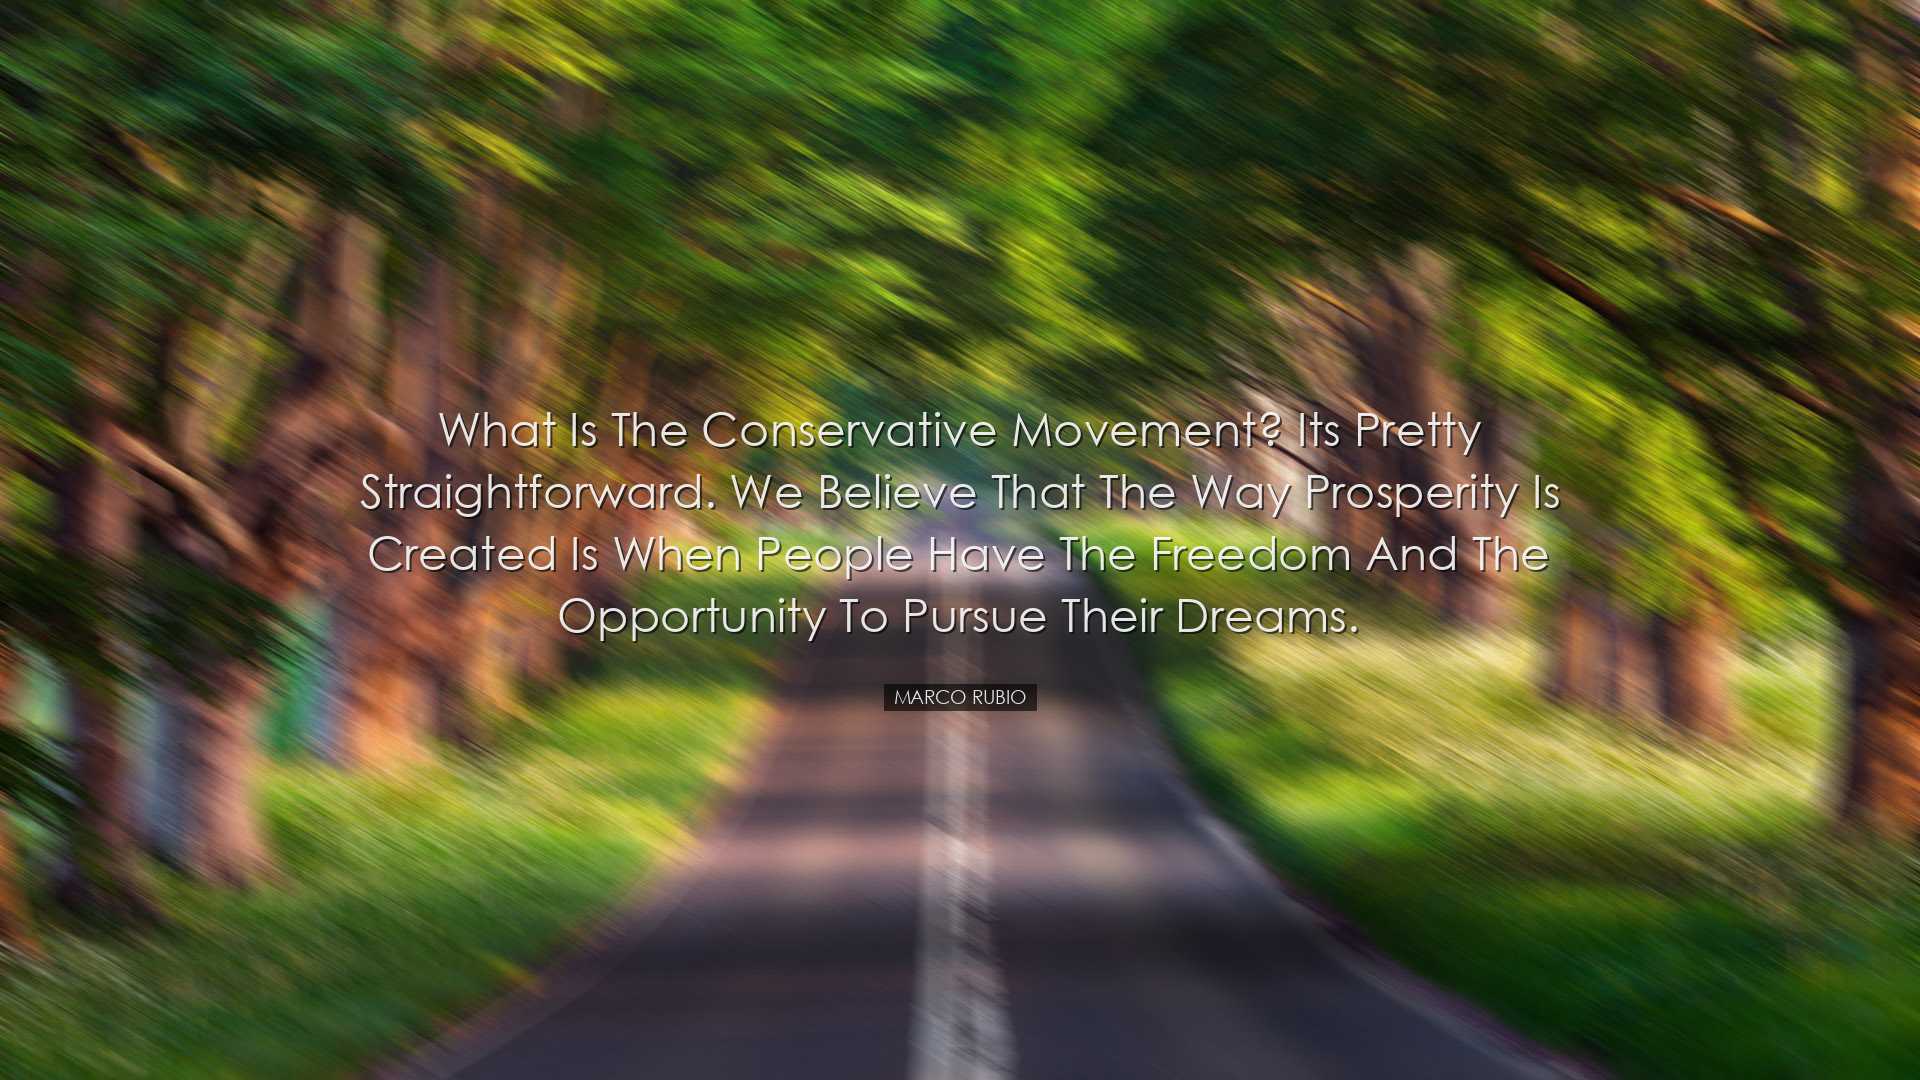 What is the conservative movement? Its pretty straightforward. We